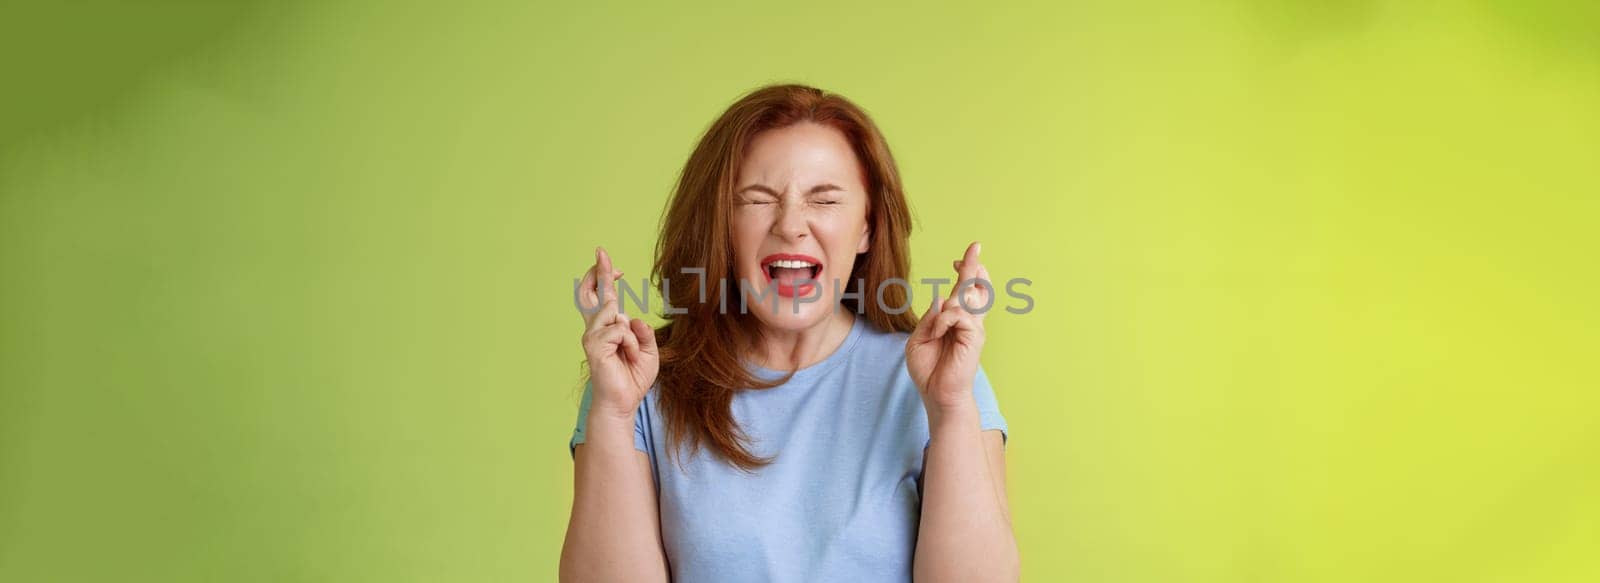 Woman wants win badly. Enthusiastic lucky redhead middle-aged 50s female pleading implore god make dream come true cross fingers good luck wishing closed eyes open mouth excitement green background.